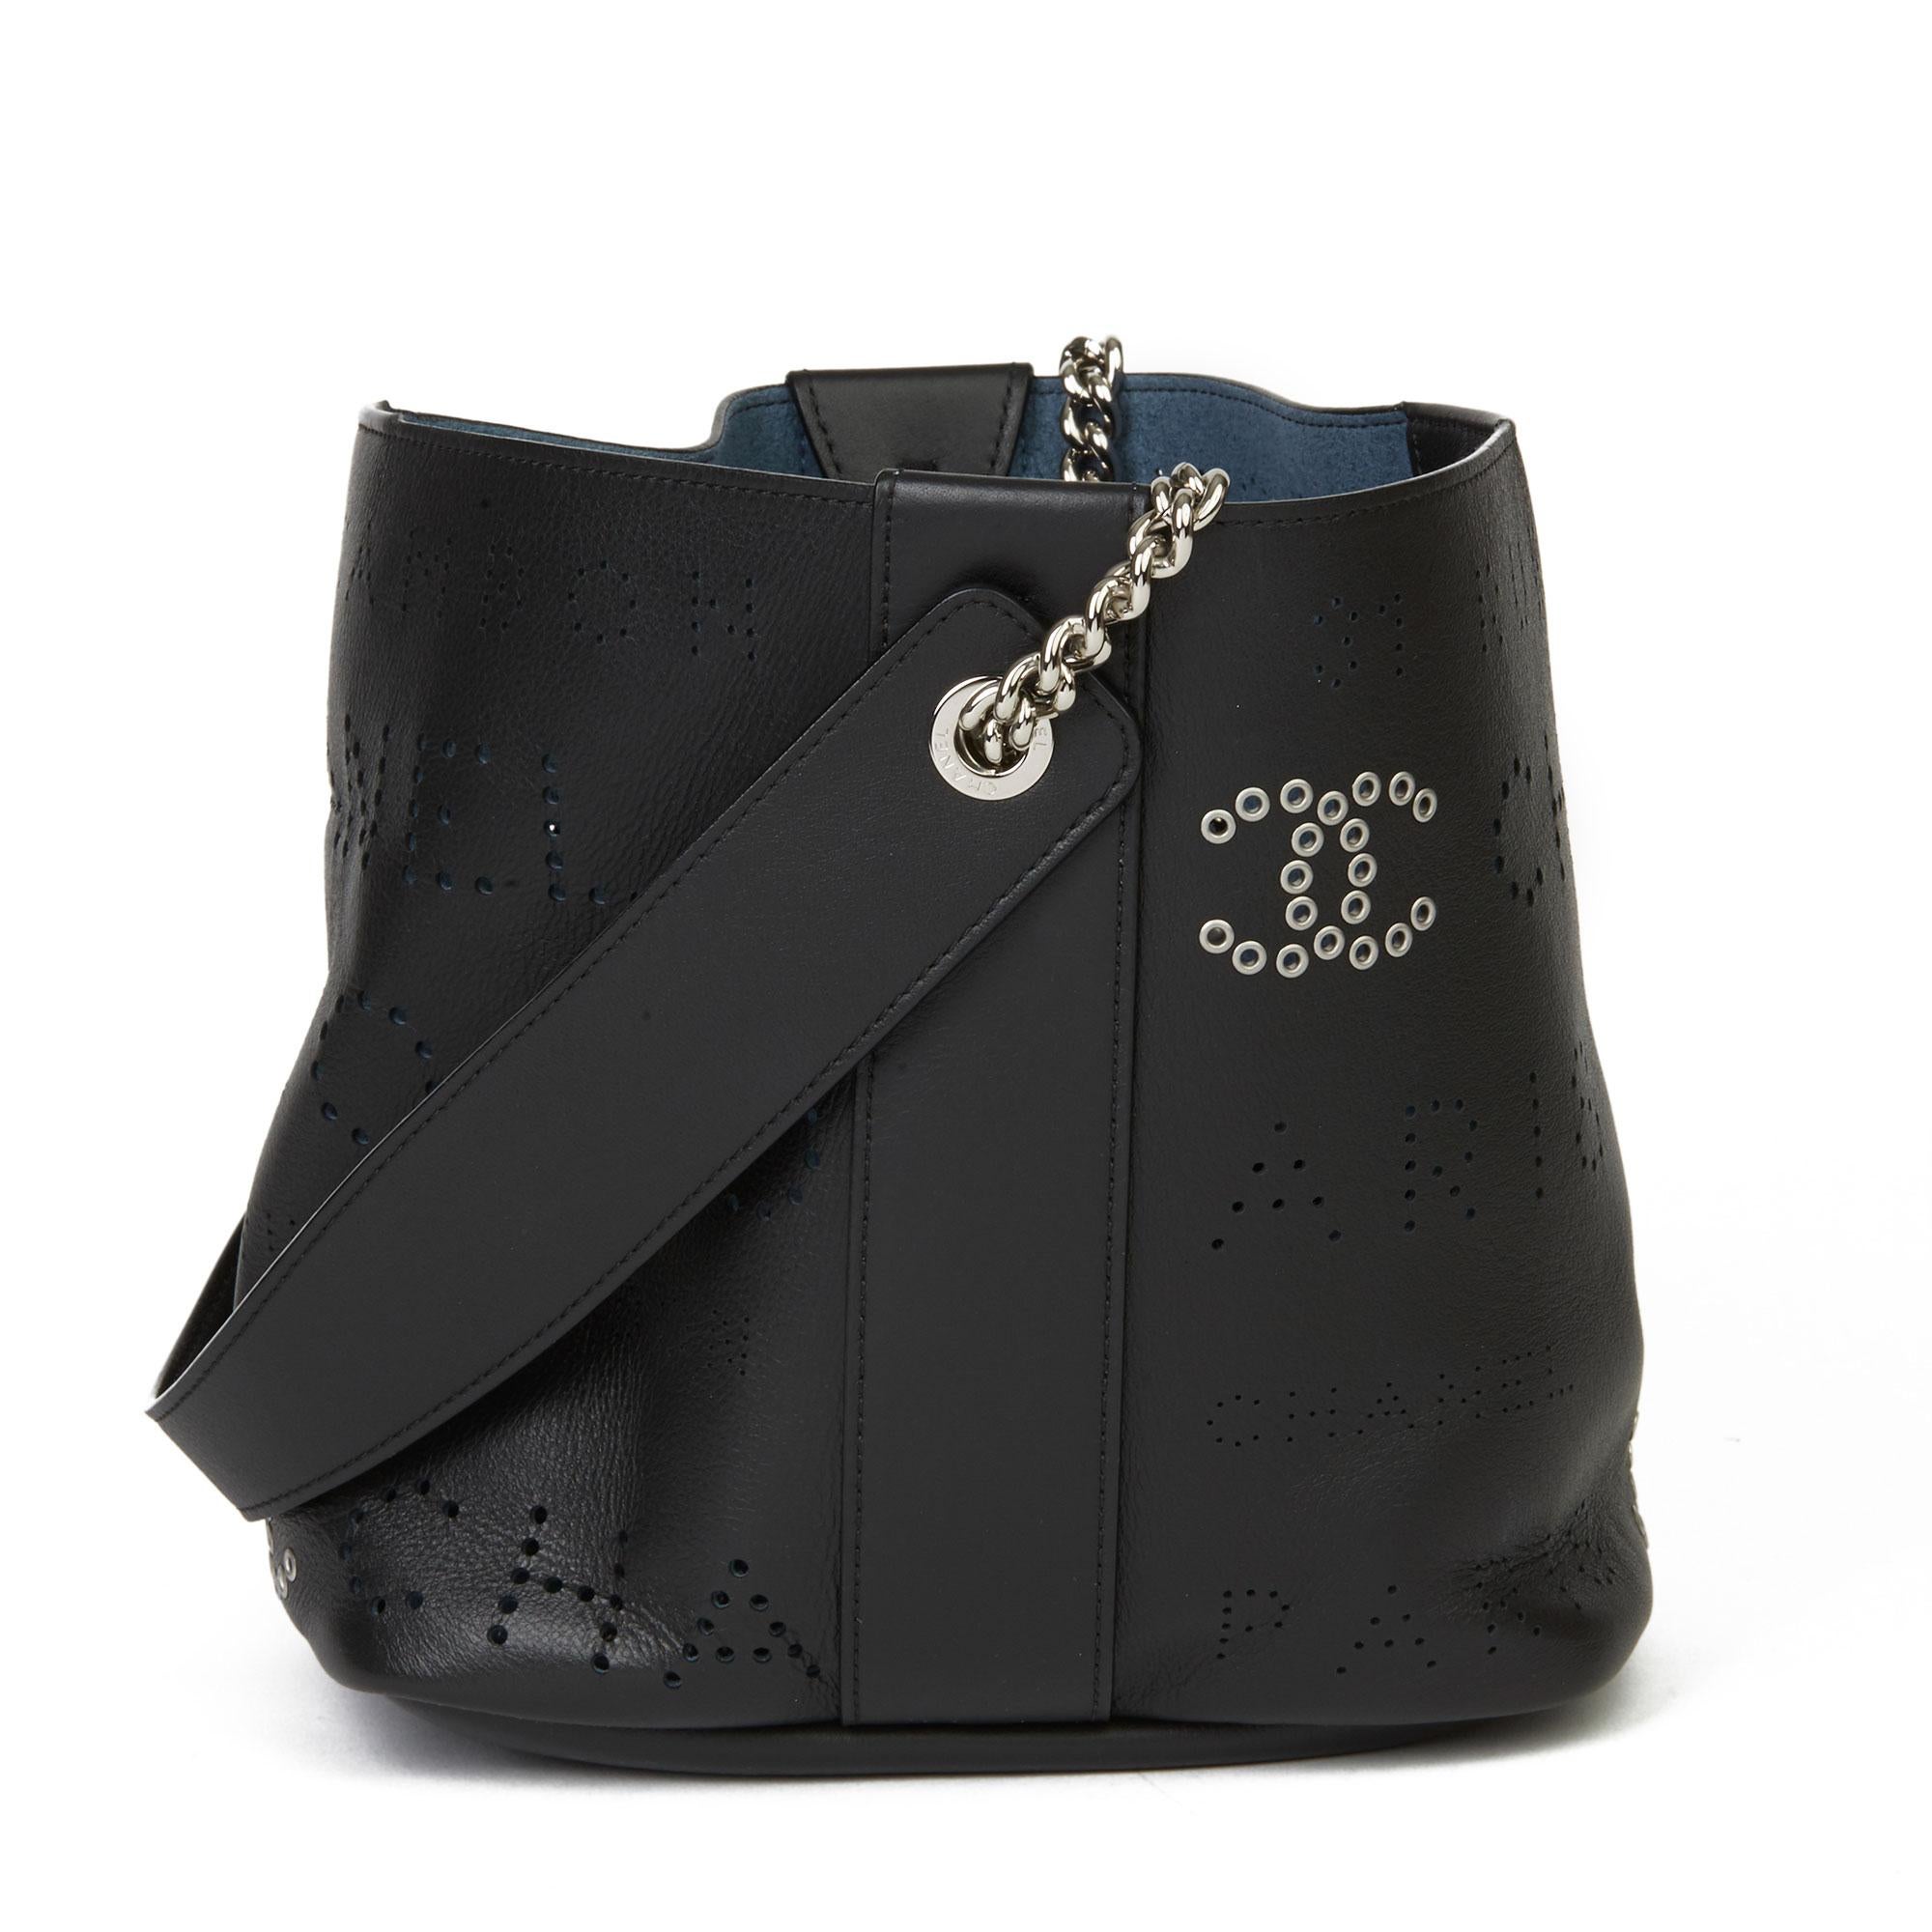 CHANEL
Black Perforated Calfskin Leather Logo Eyelets Bucket Bag with Tweed Pouch

Xupes Reference: HB3634
Serial Number: 27142896
Age (Circa): 2019
Accompanied By: Authenticity Card, Pouch
Authenticity Details: Authenticity Card, Serial Sticker